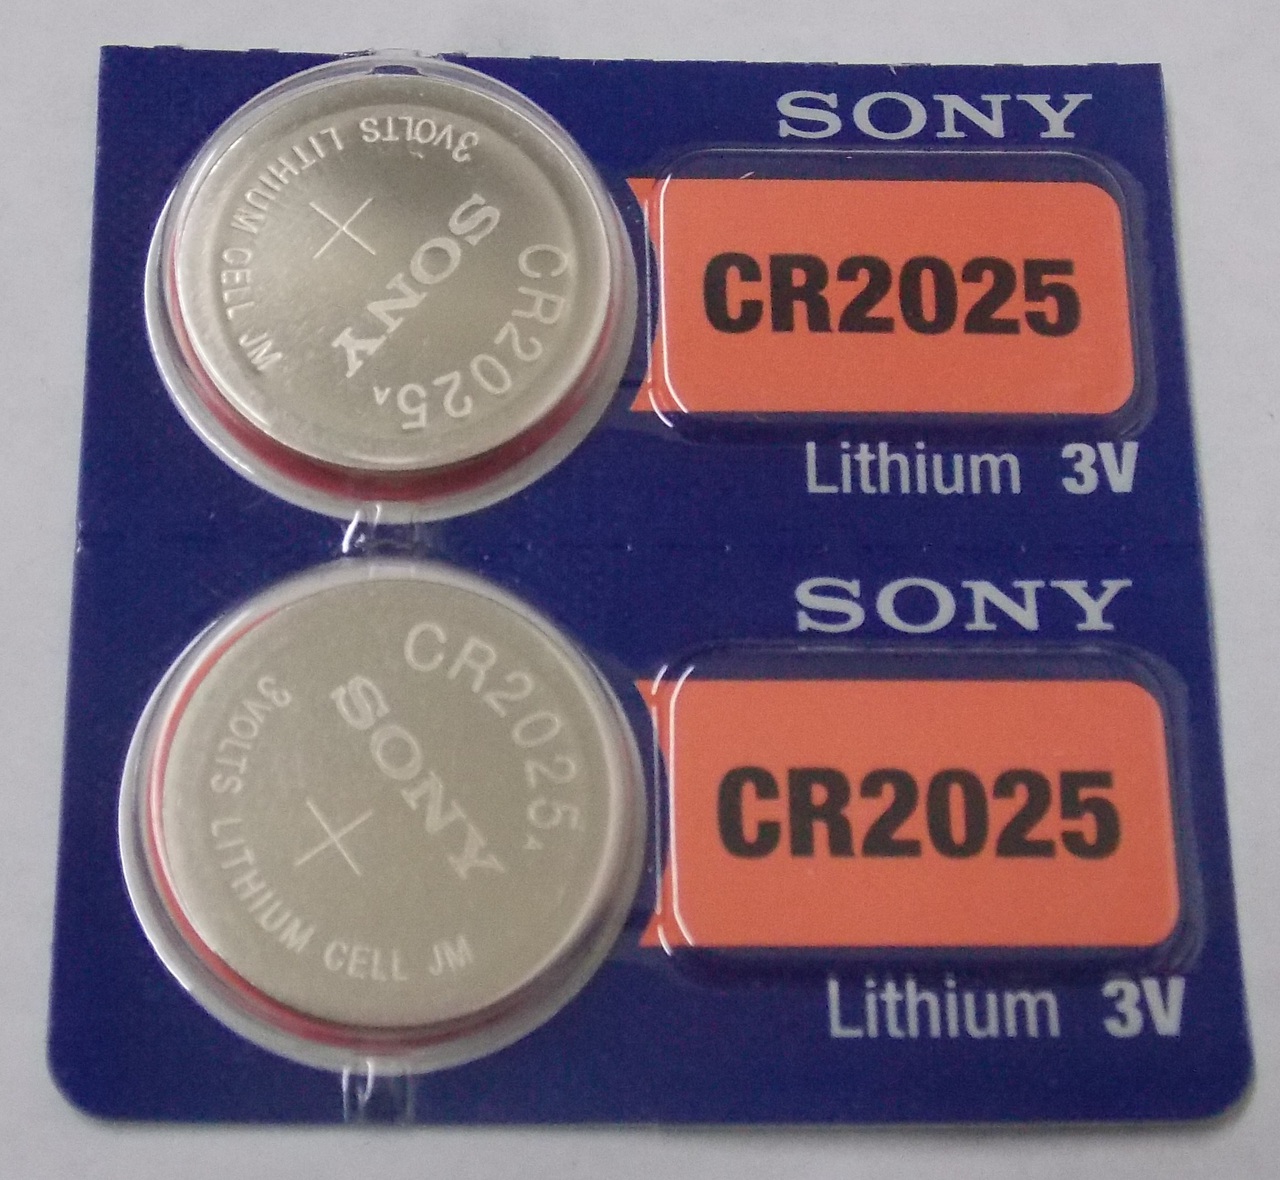 Sony CR2025 3V Lithium Coin Battery - 2 Pack - FREE SHIPPING!